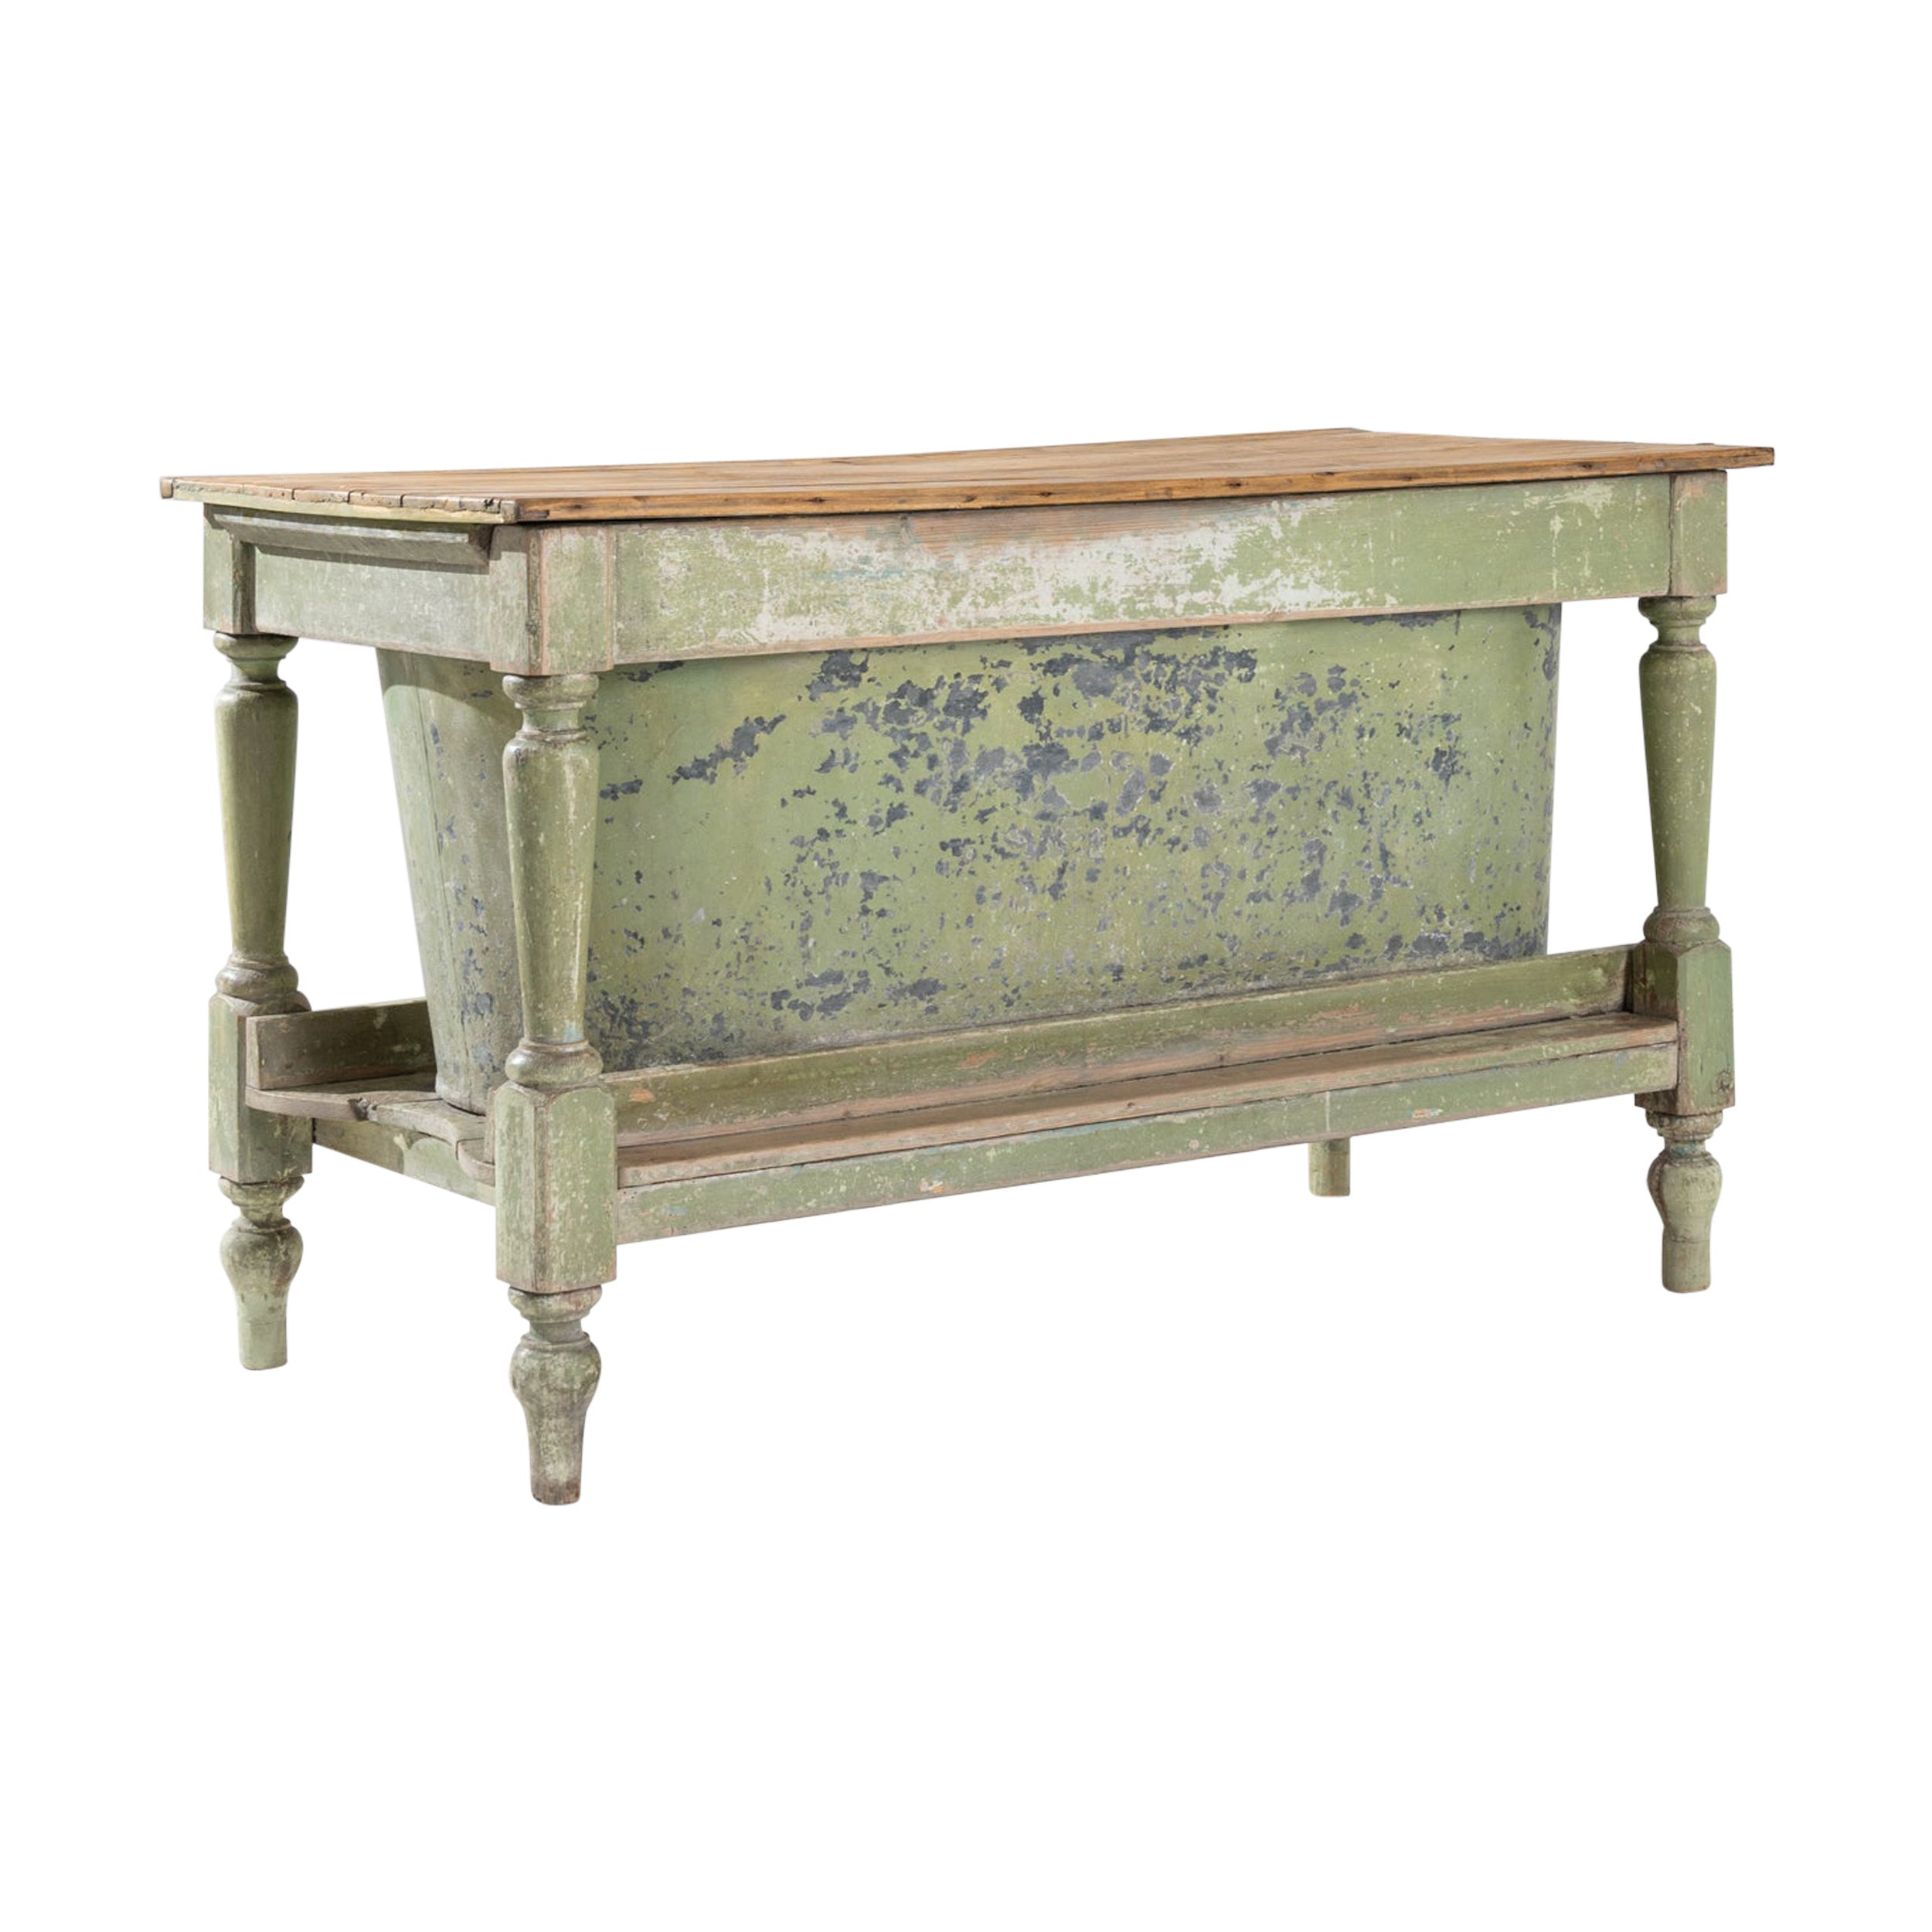 19th Century French Wooden Table with Zinc Bath